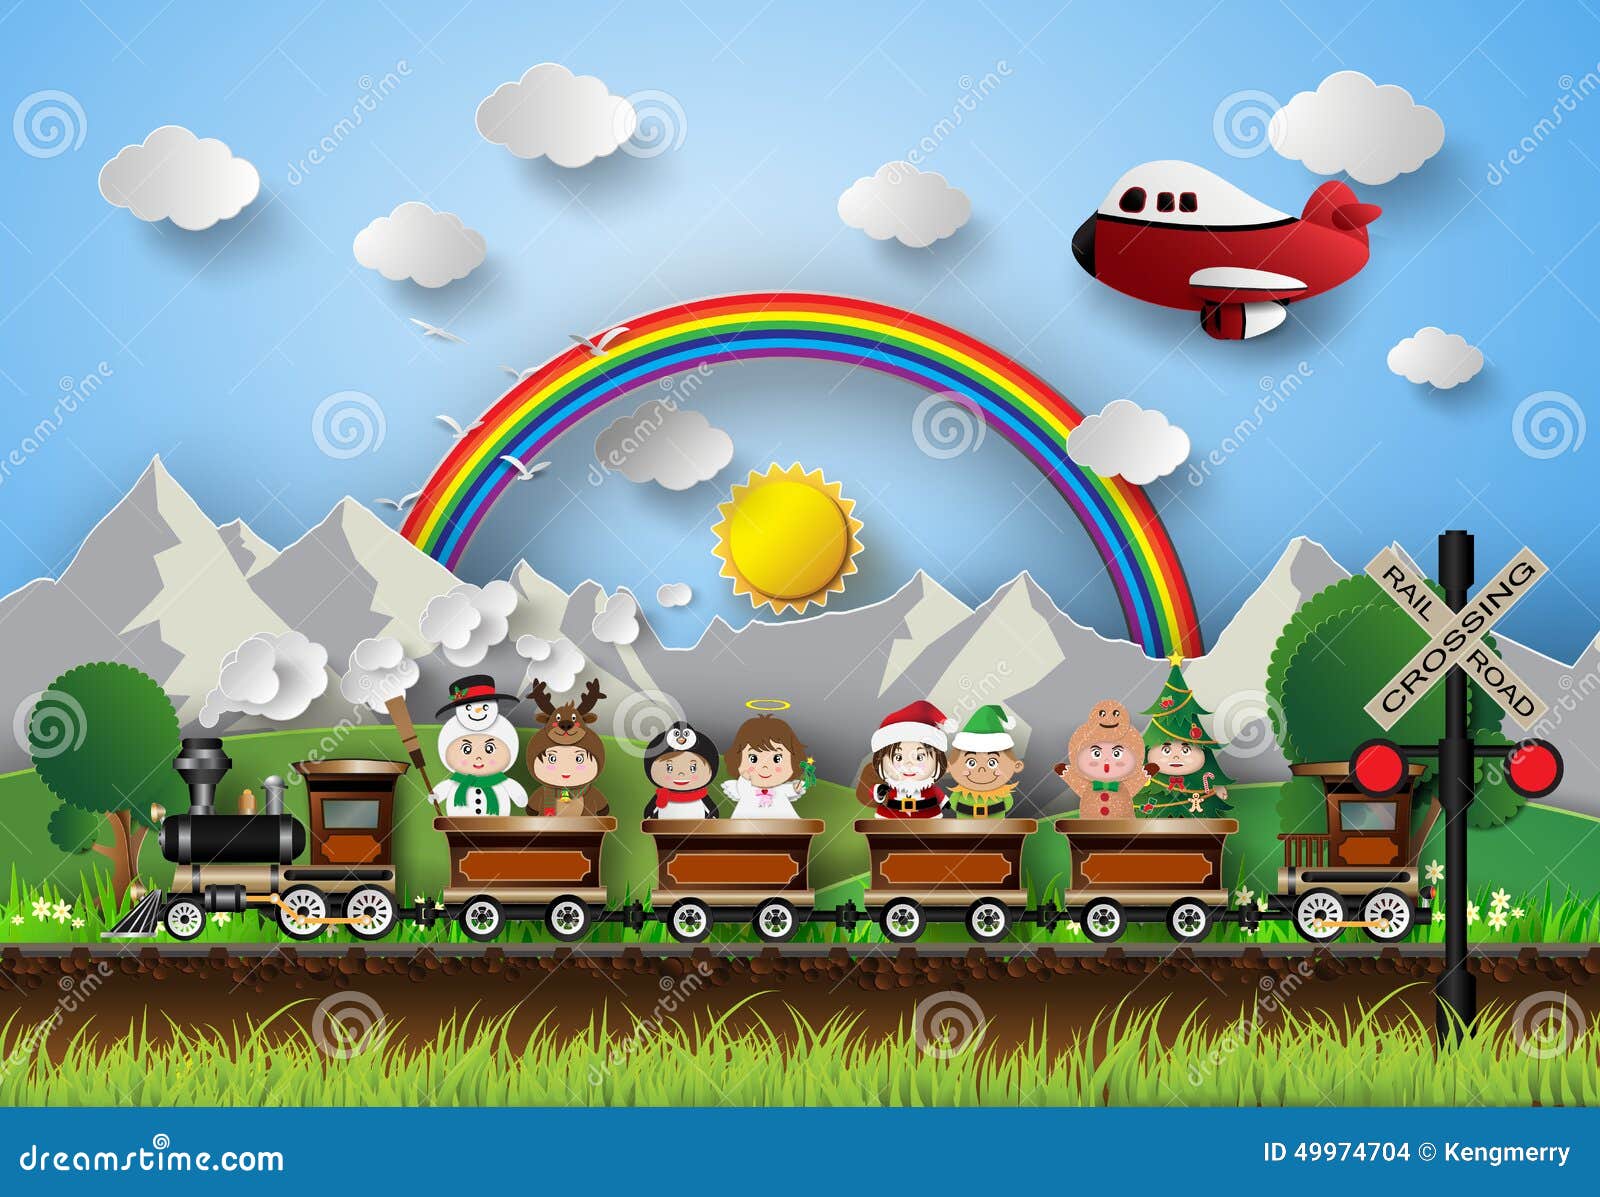 Children in Fancy Dress Sitting on a Train Running on the Tracks Stock  Vector - Illustration of character, greeting: 49974704